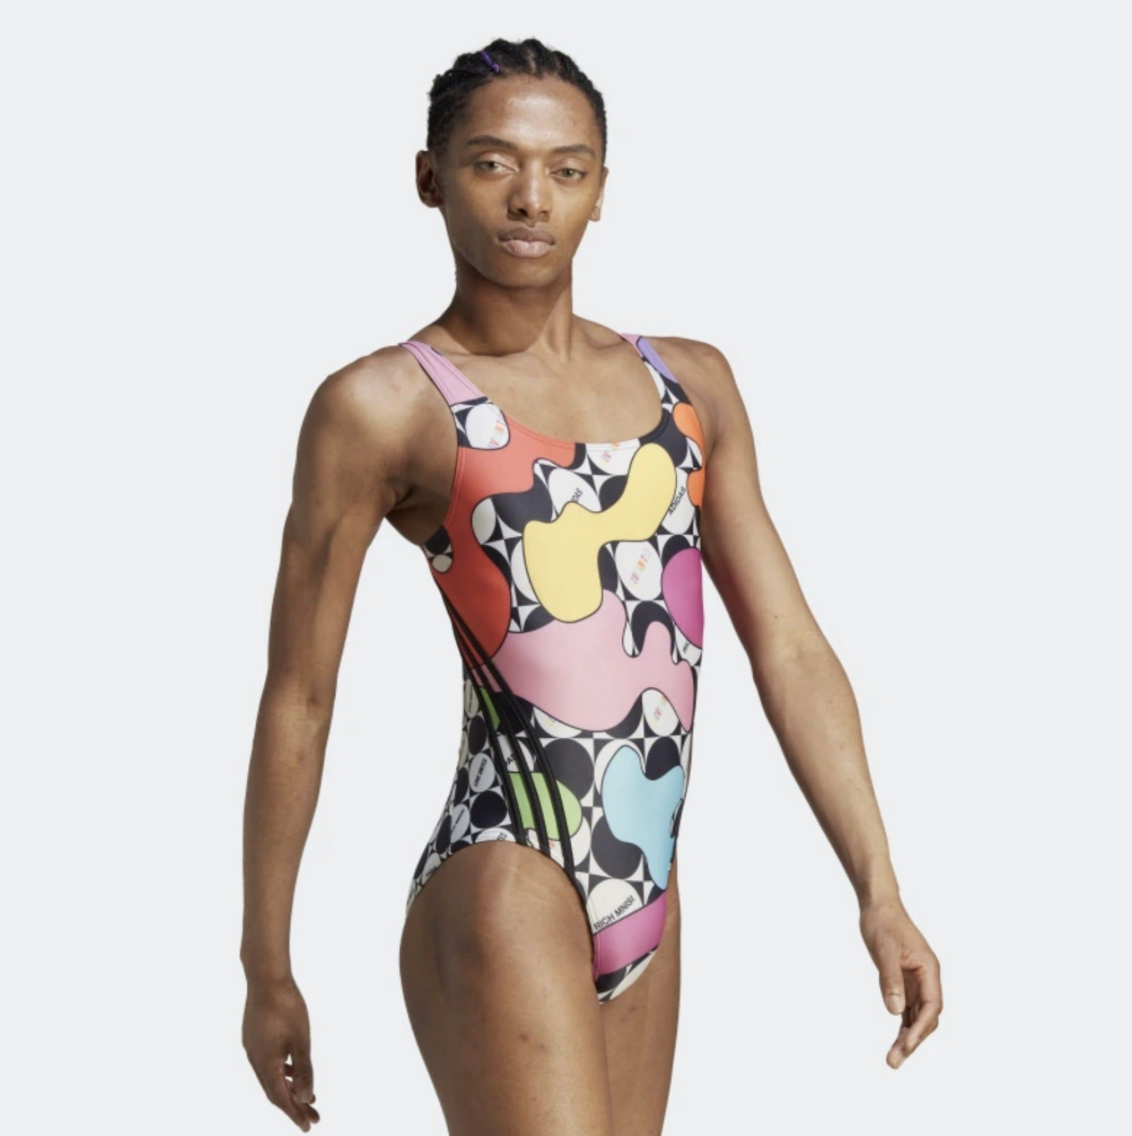 Adidas Hit With Anti-trans Backlash Over Pride Swimsuit